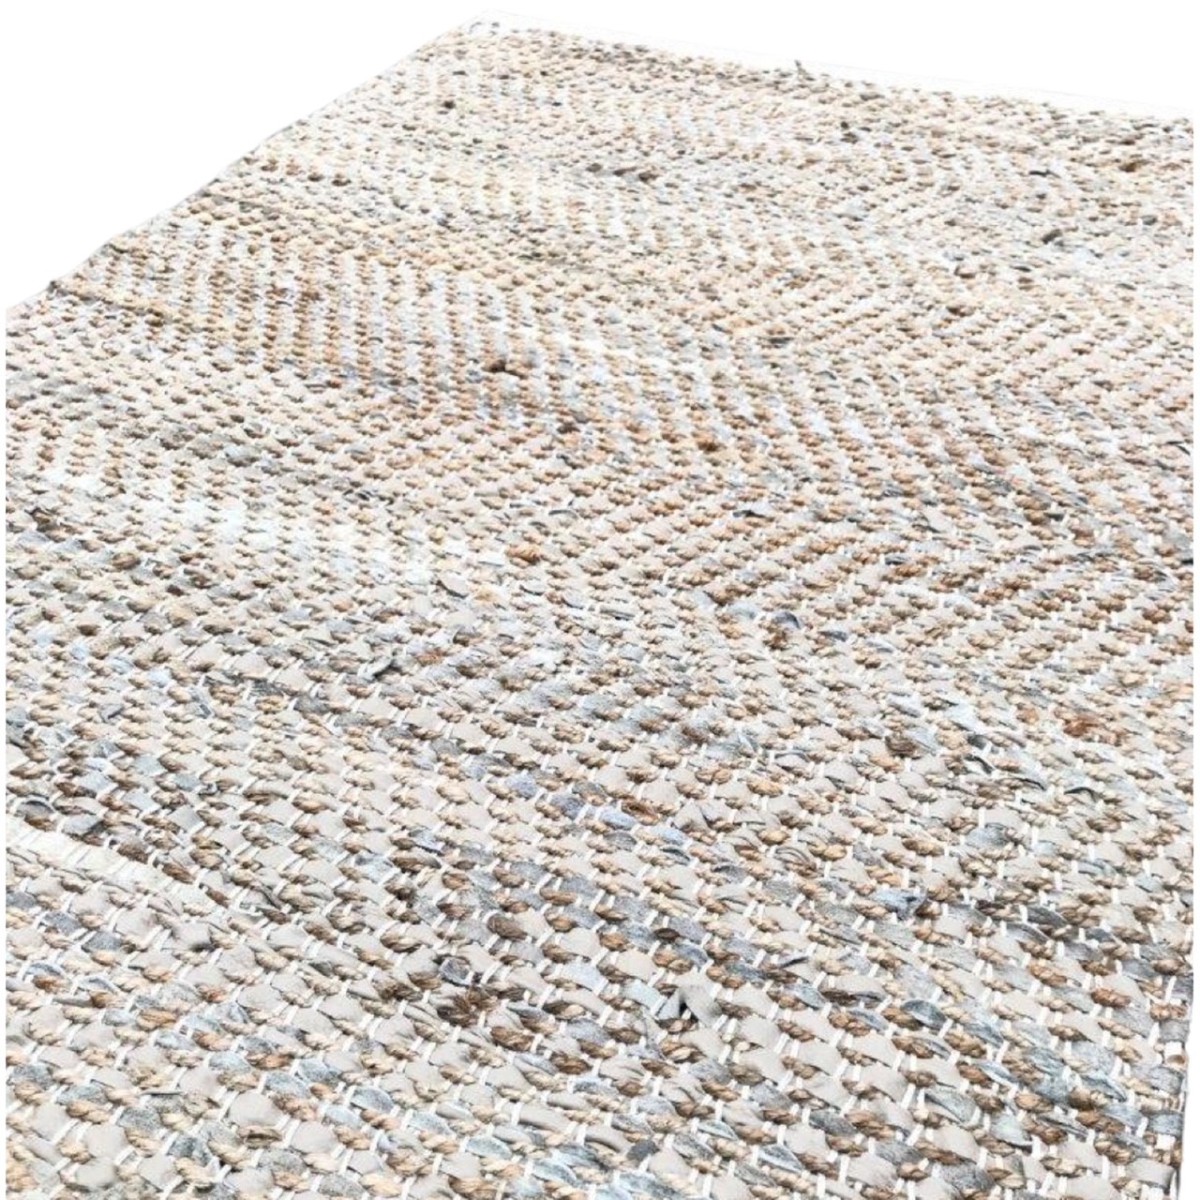 rug 200x300 cm recycled leather beige and jute